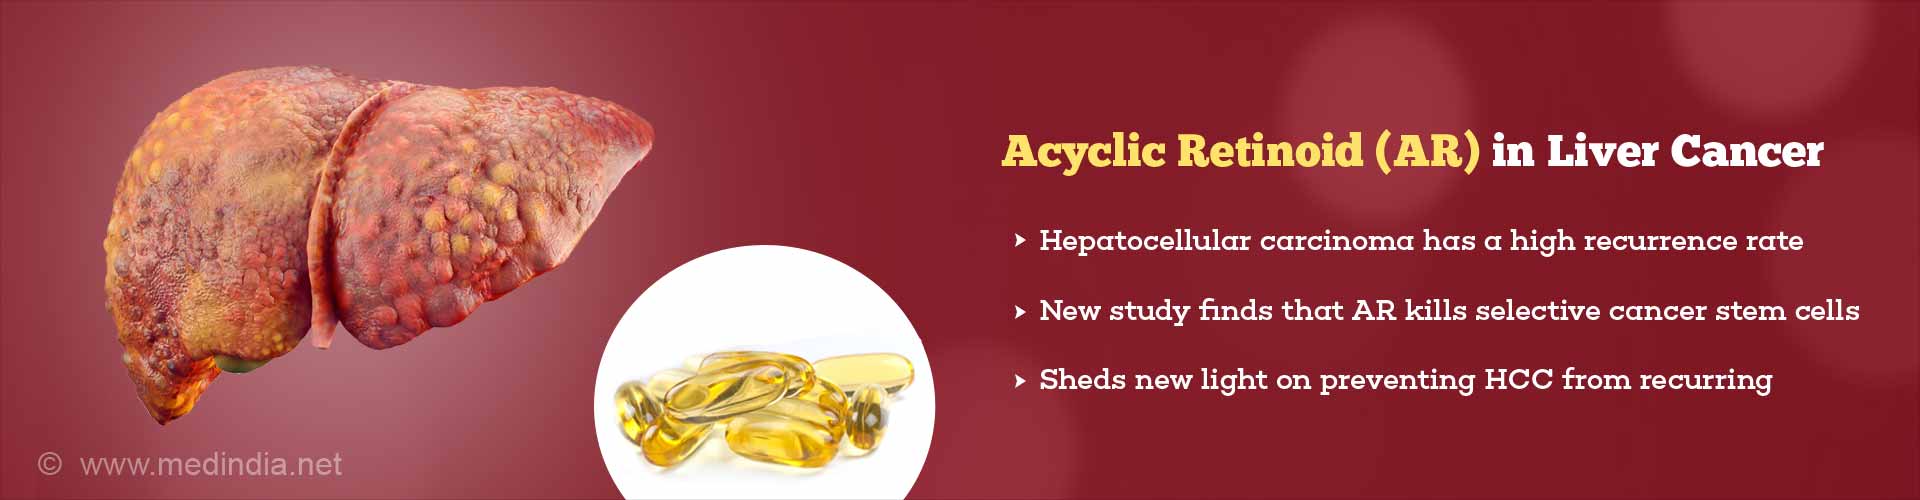 acyclic retinoid (AR) in liver cancer
- hepatocellular carcinoma has a high recurrence rate
- new study finds that AR kills selective cancer stem cells
- sheds new light on preventing HCC from recurring